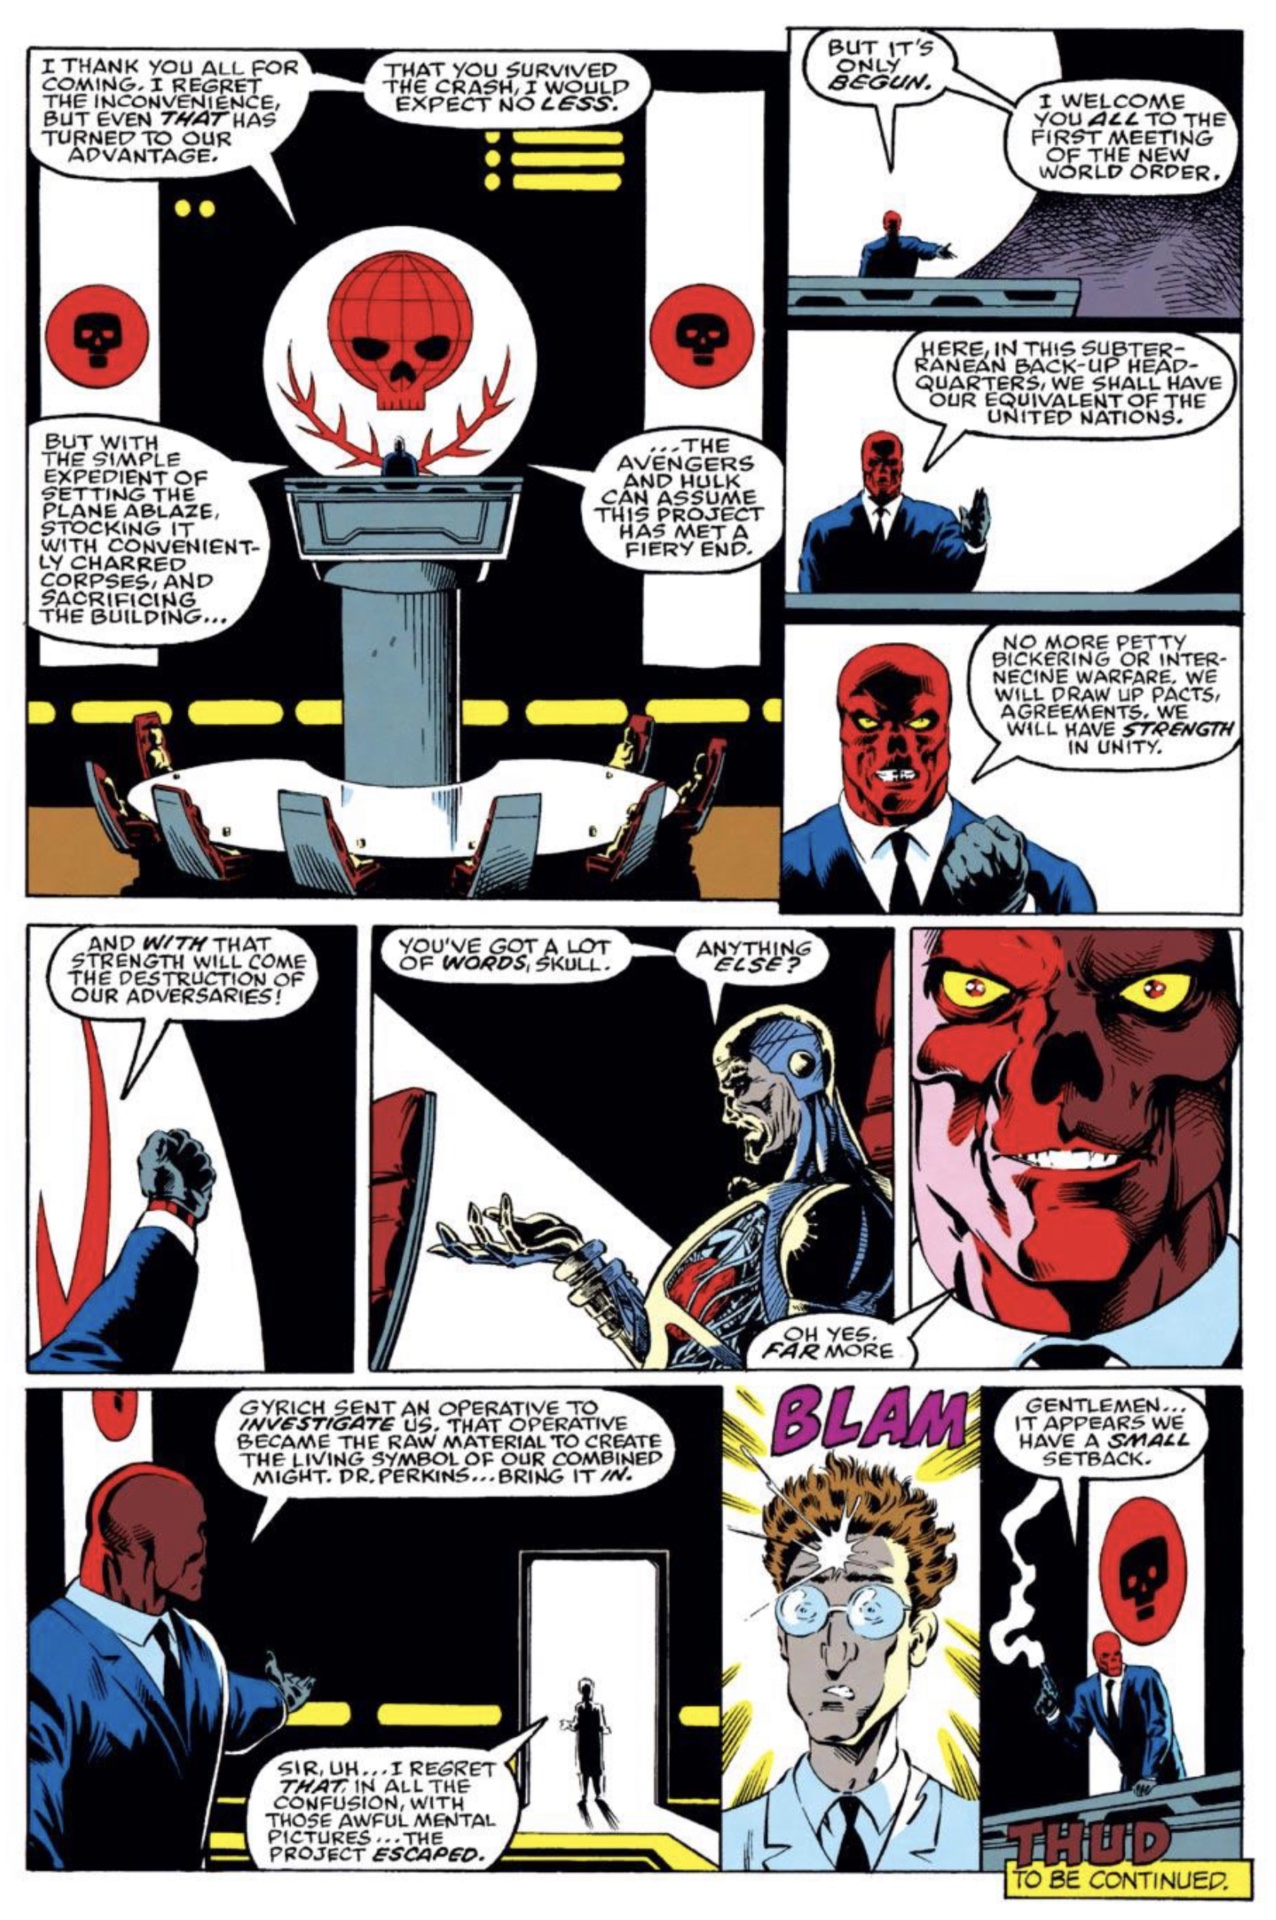 The New World Order in Marvel Comics